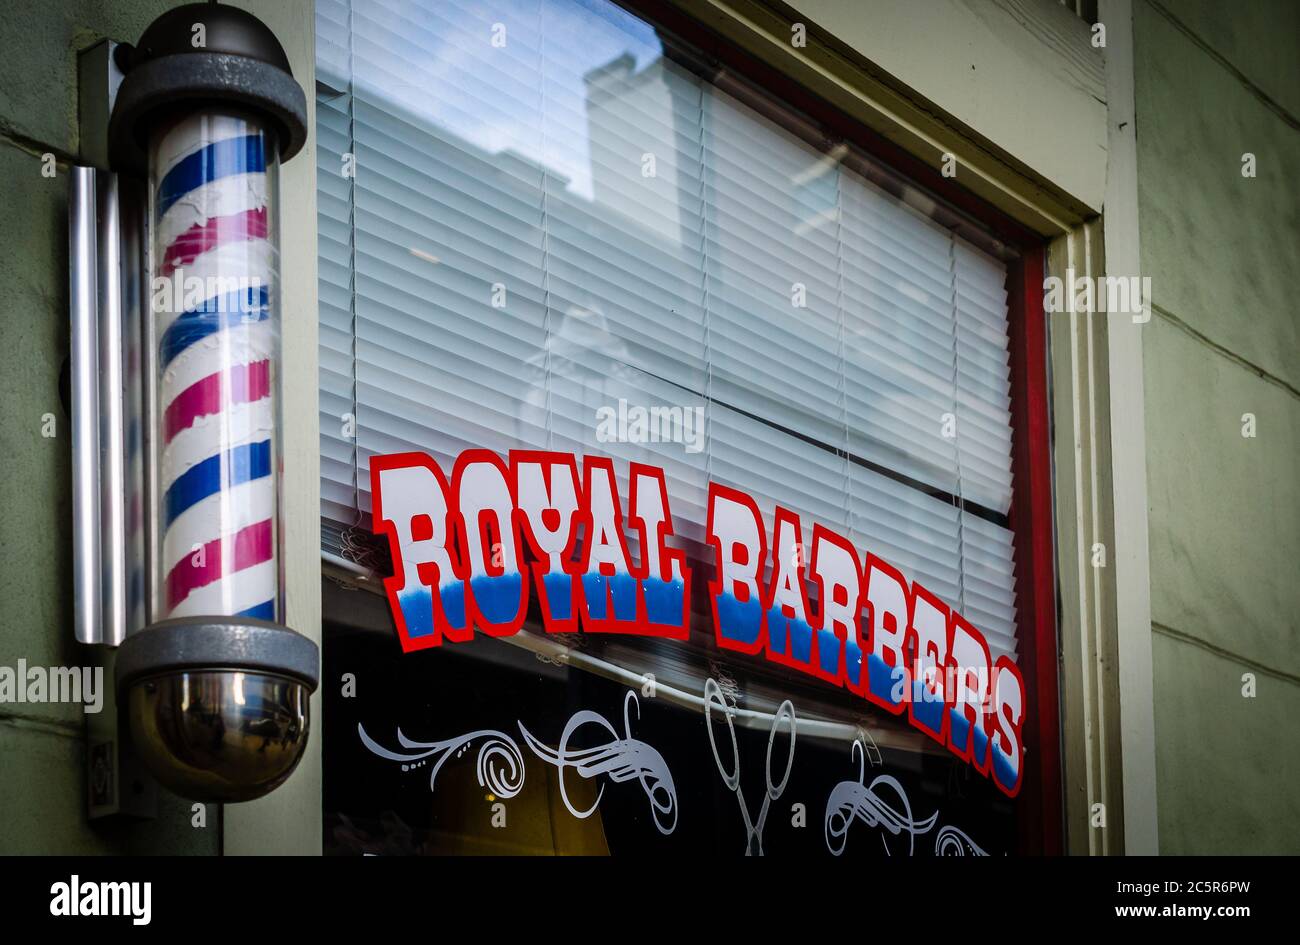 A vintage barber’s pole is displayed outside Royal Barbers, July 3, 2020, in Mobile, Alabama. Barber’s poles are a traditional trade sign. Stock Photo